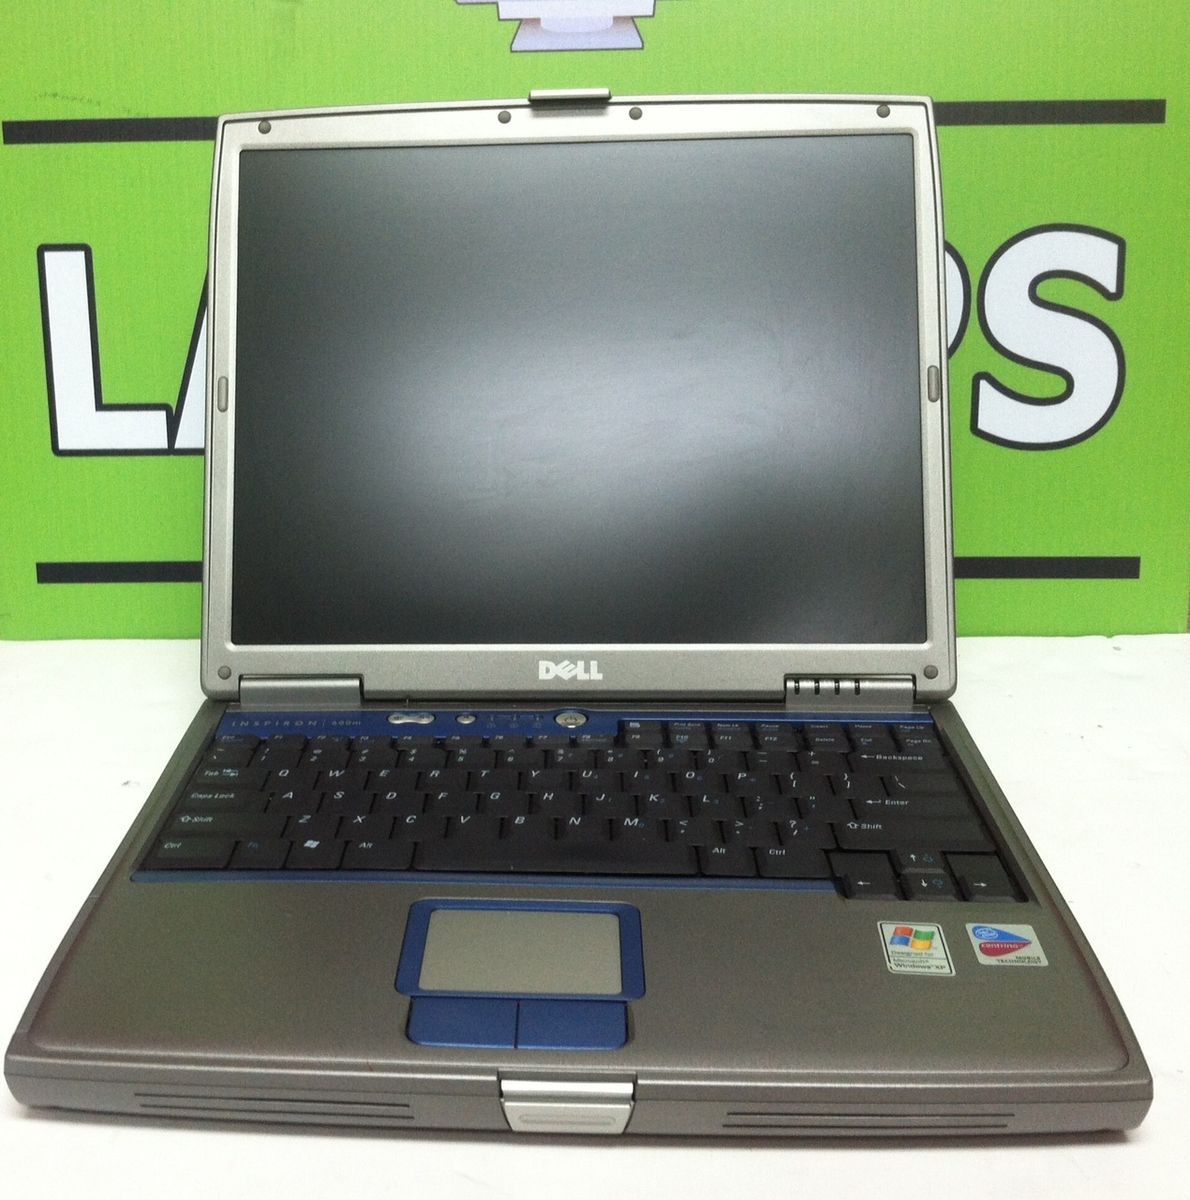 Dell Inspiron 600m Laptop For parts or project